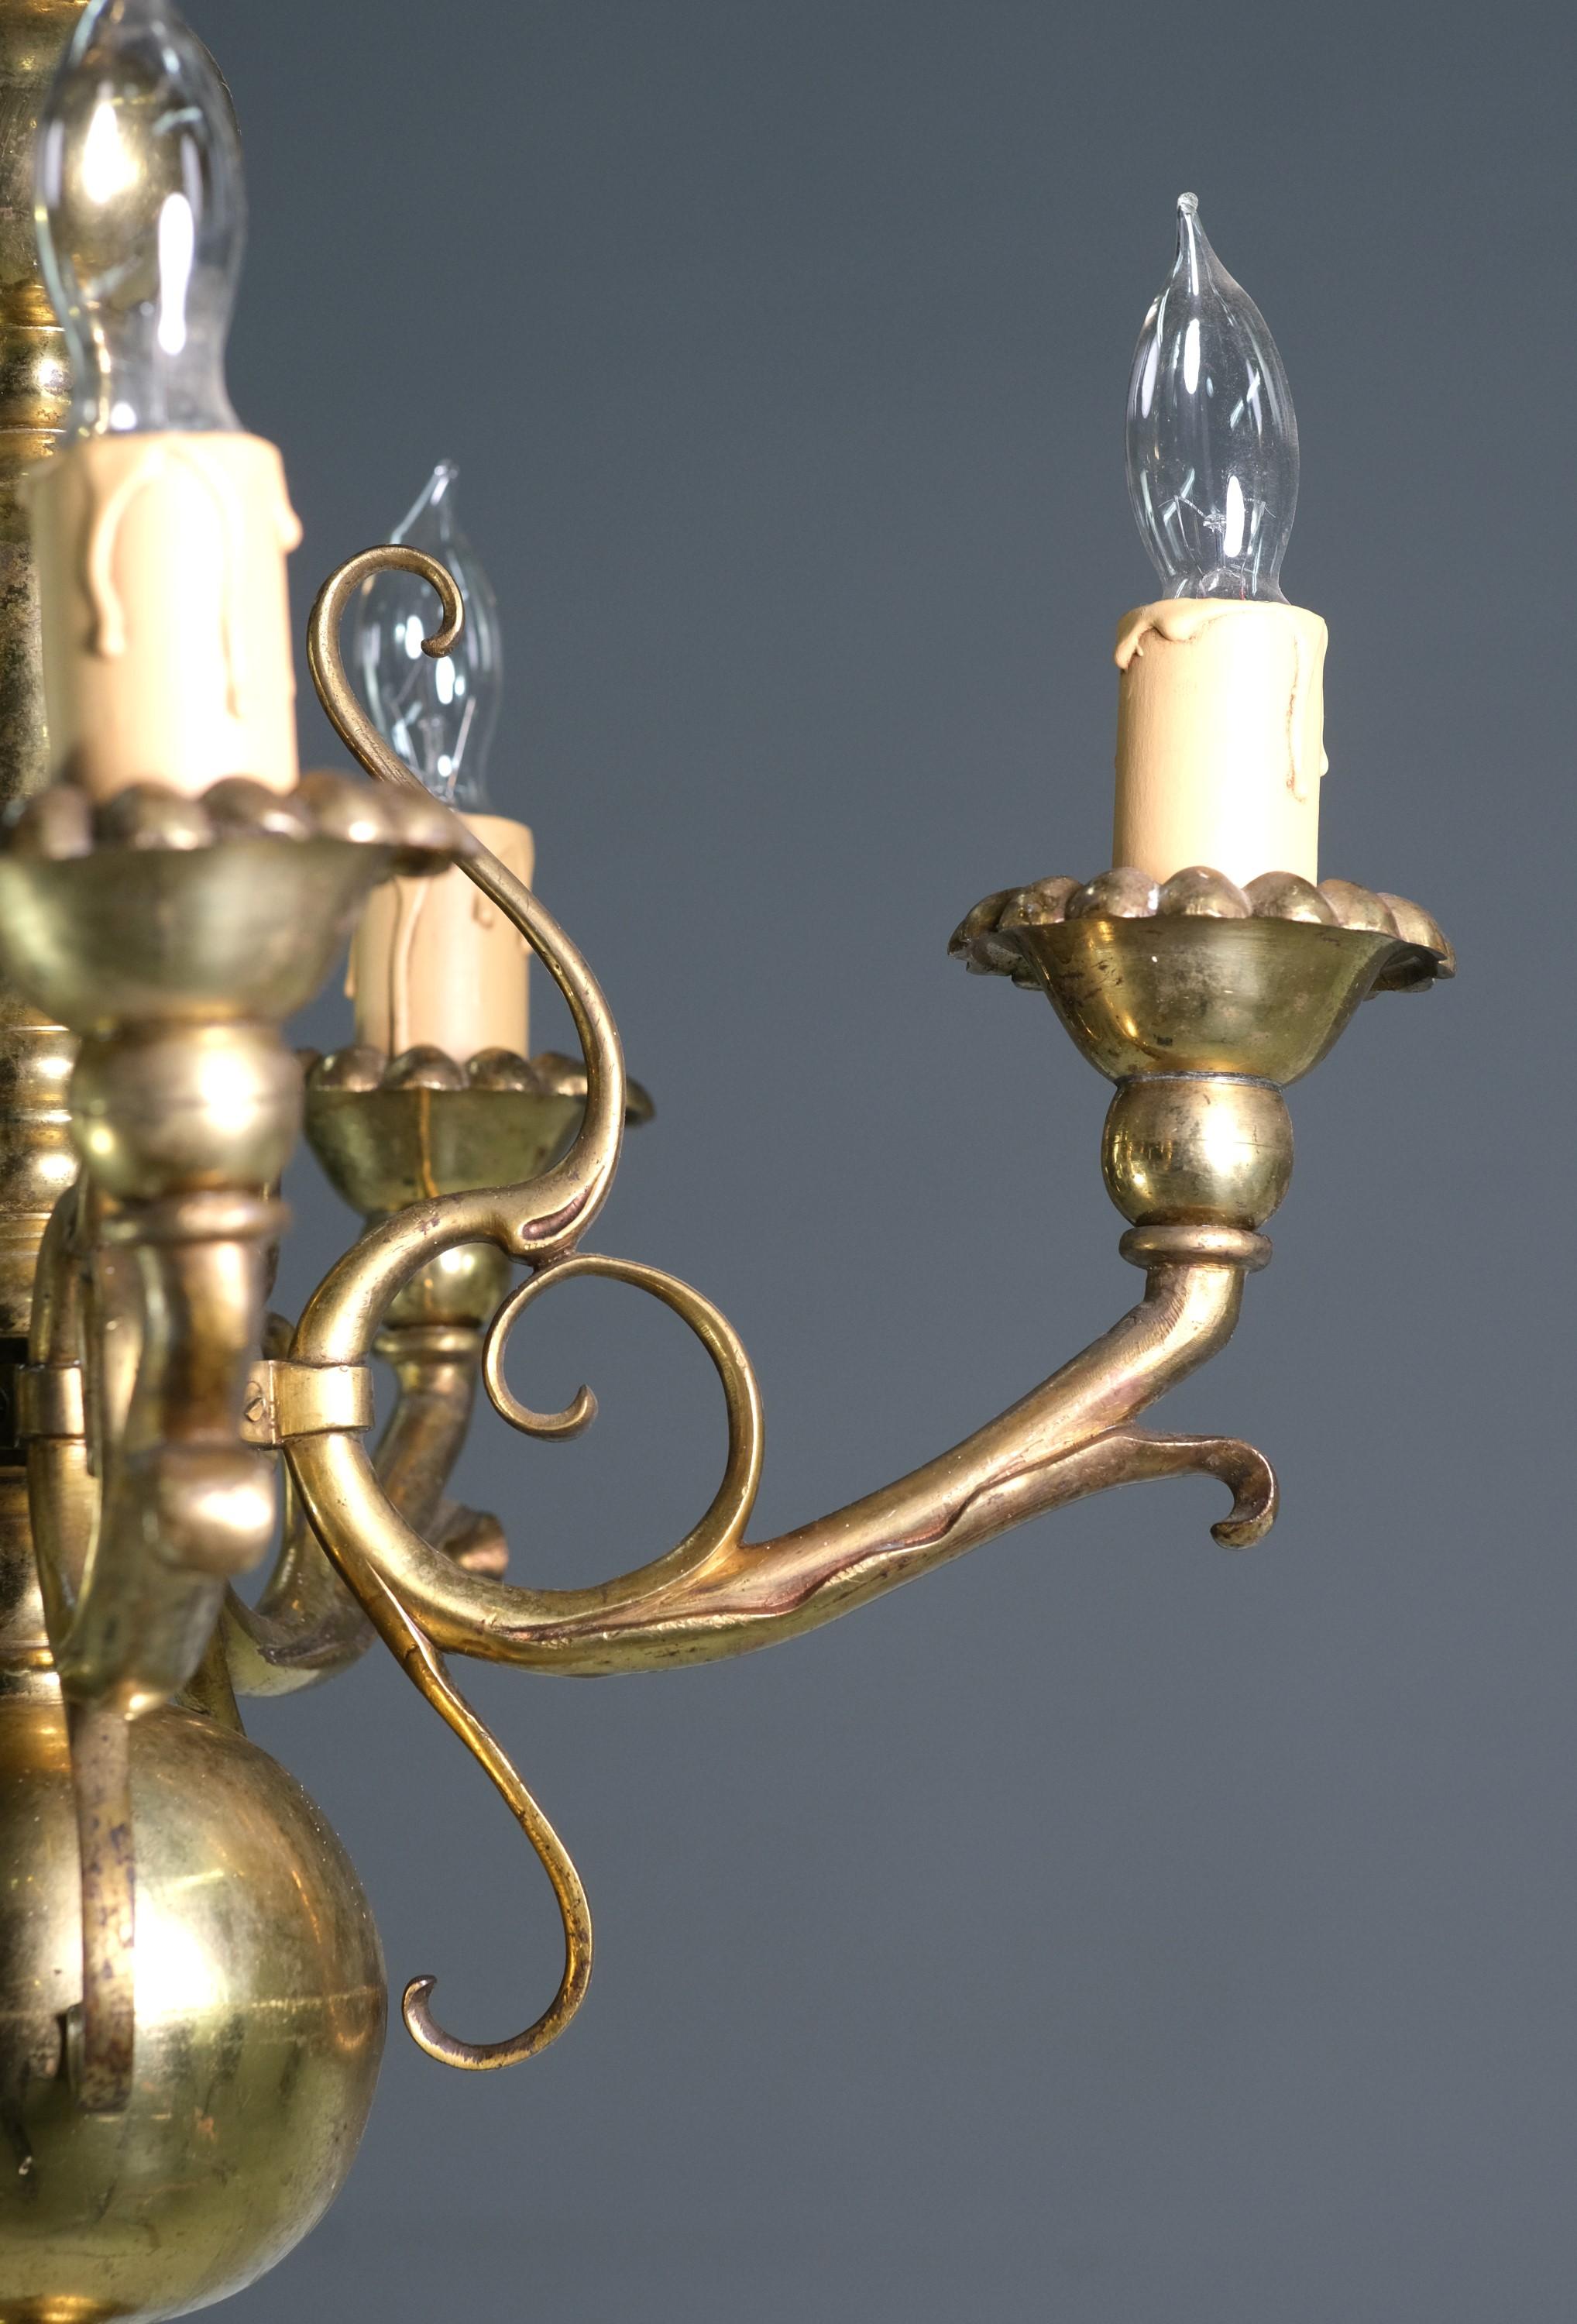 Baroque Solid Brass 5 Light Chandelier Florals Swirls Design In Good Condition For Sale In New York, NY